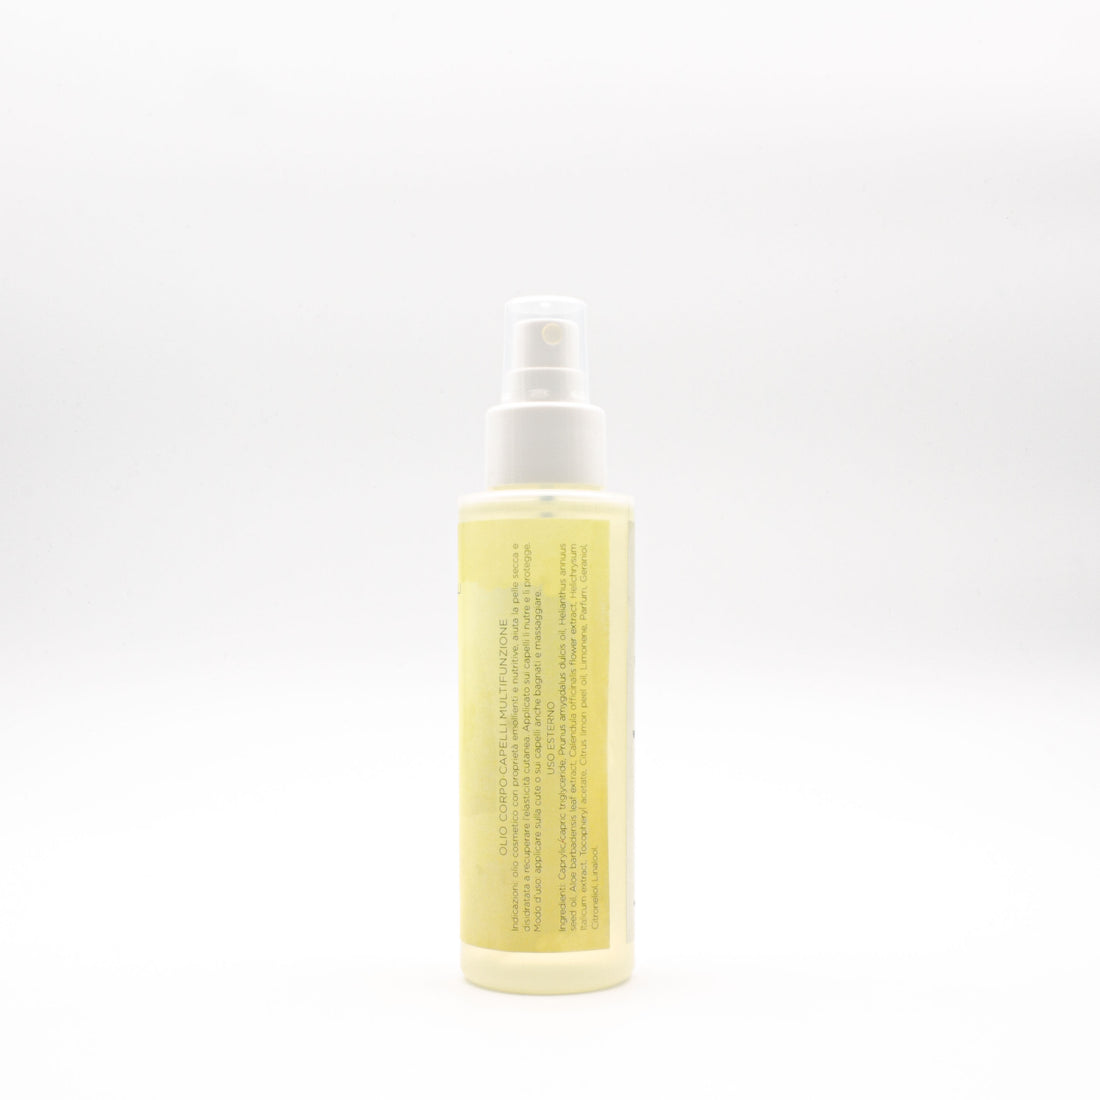 Multifunctional Body and Hair Oil Sateen